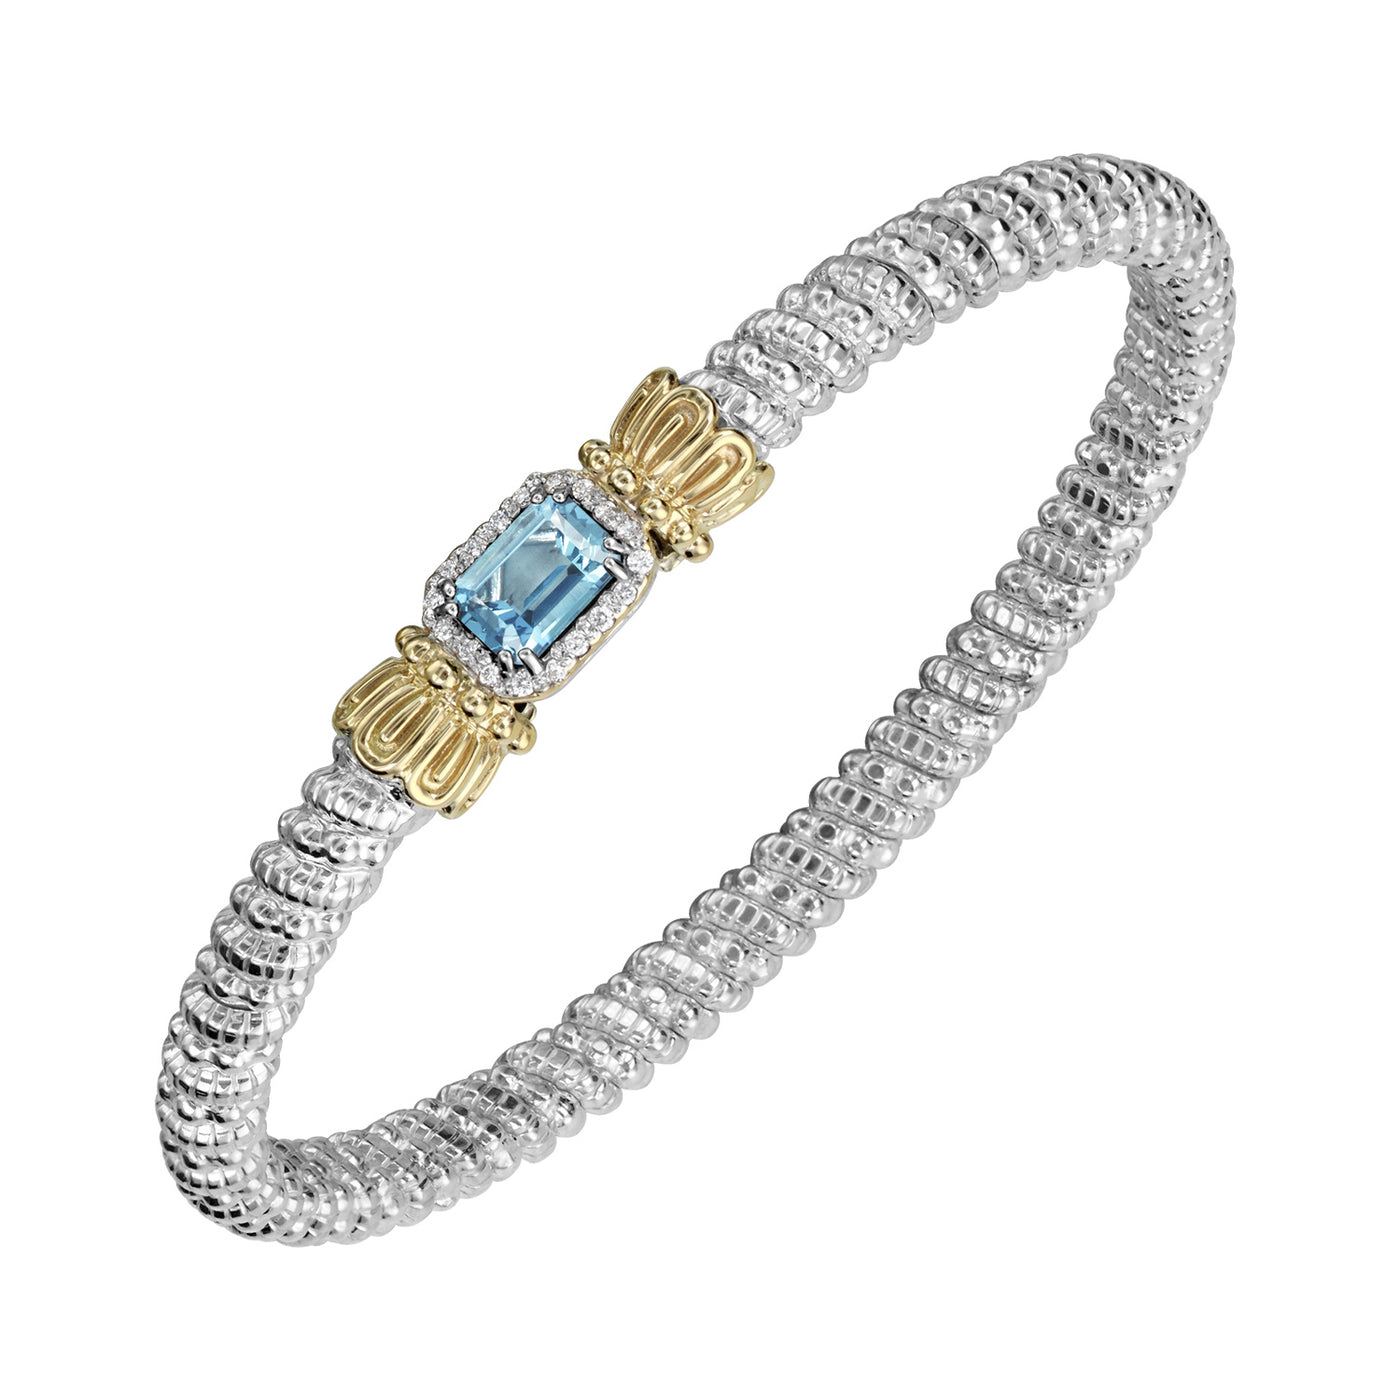 Vahan Sterling Silver and 14k Yellow Gold Moiré Beaded® Bangle Bracelet with Diamonds and Blue Topaz – 23404DSBT04